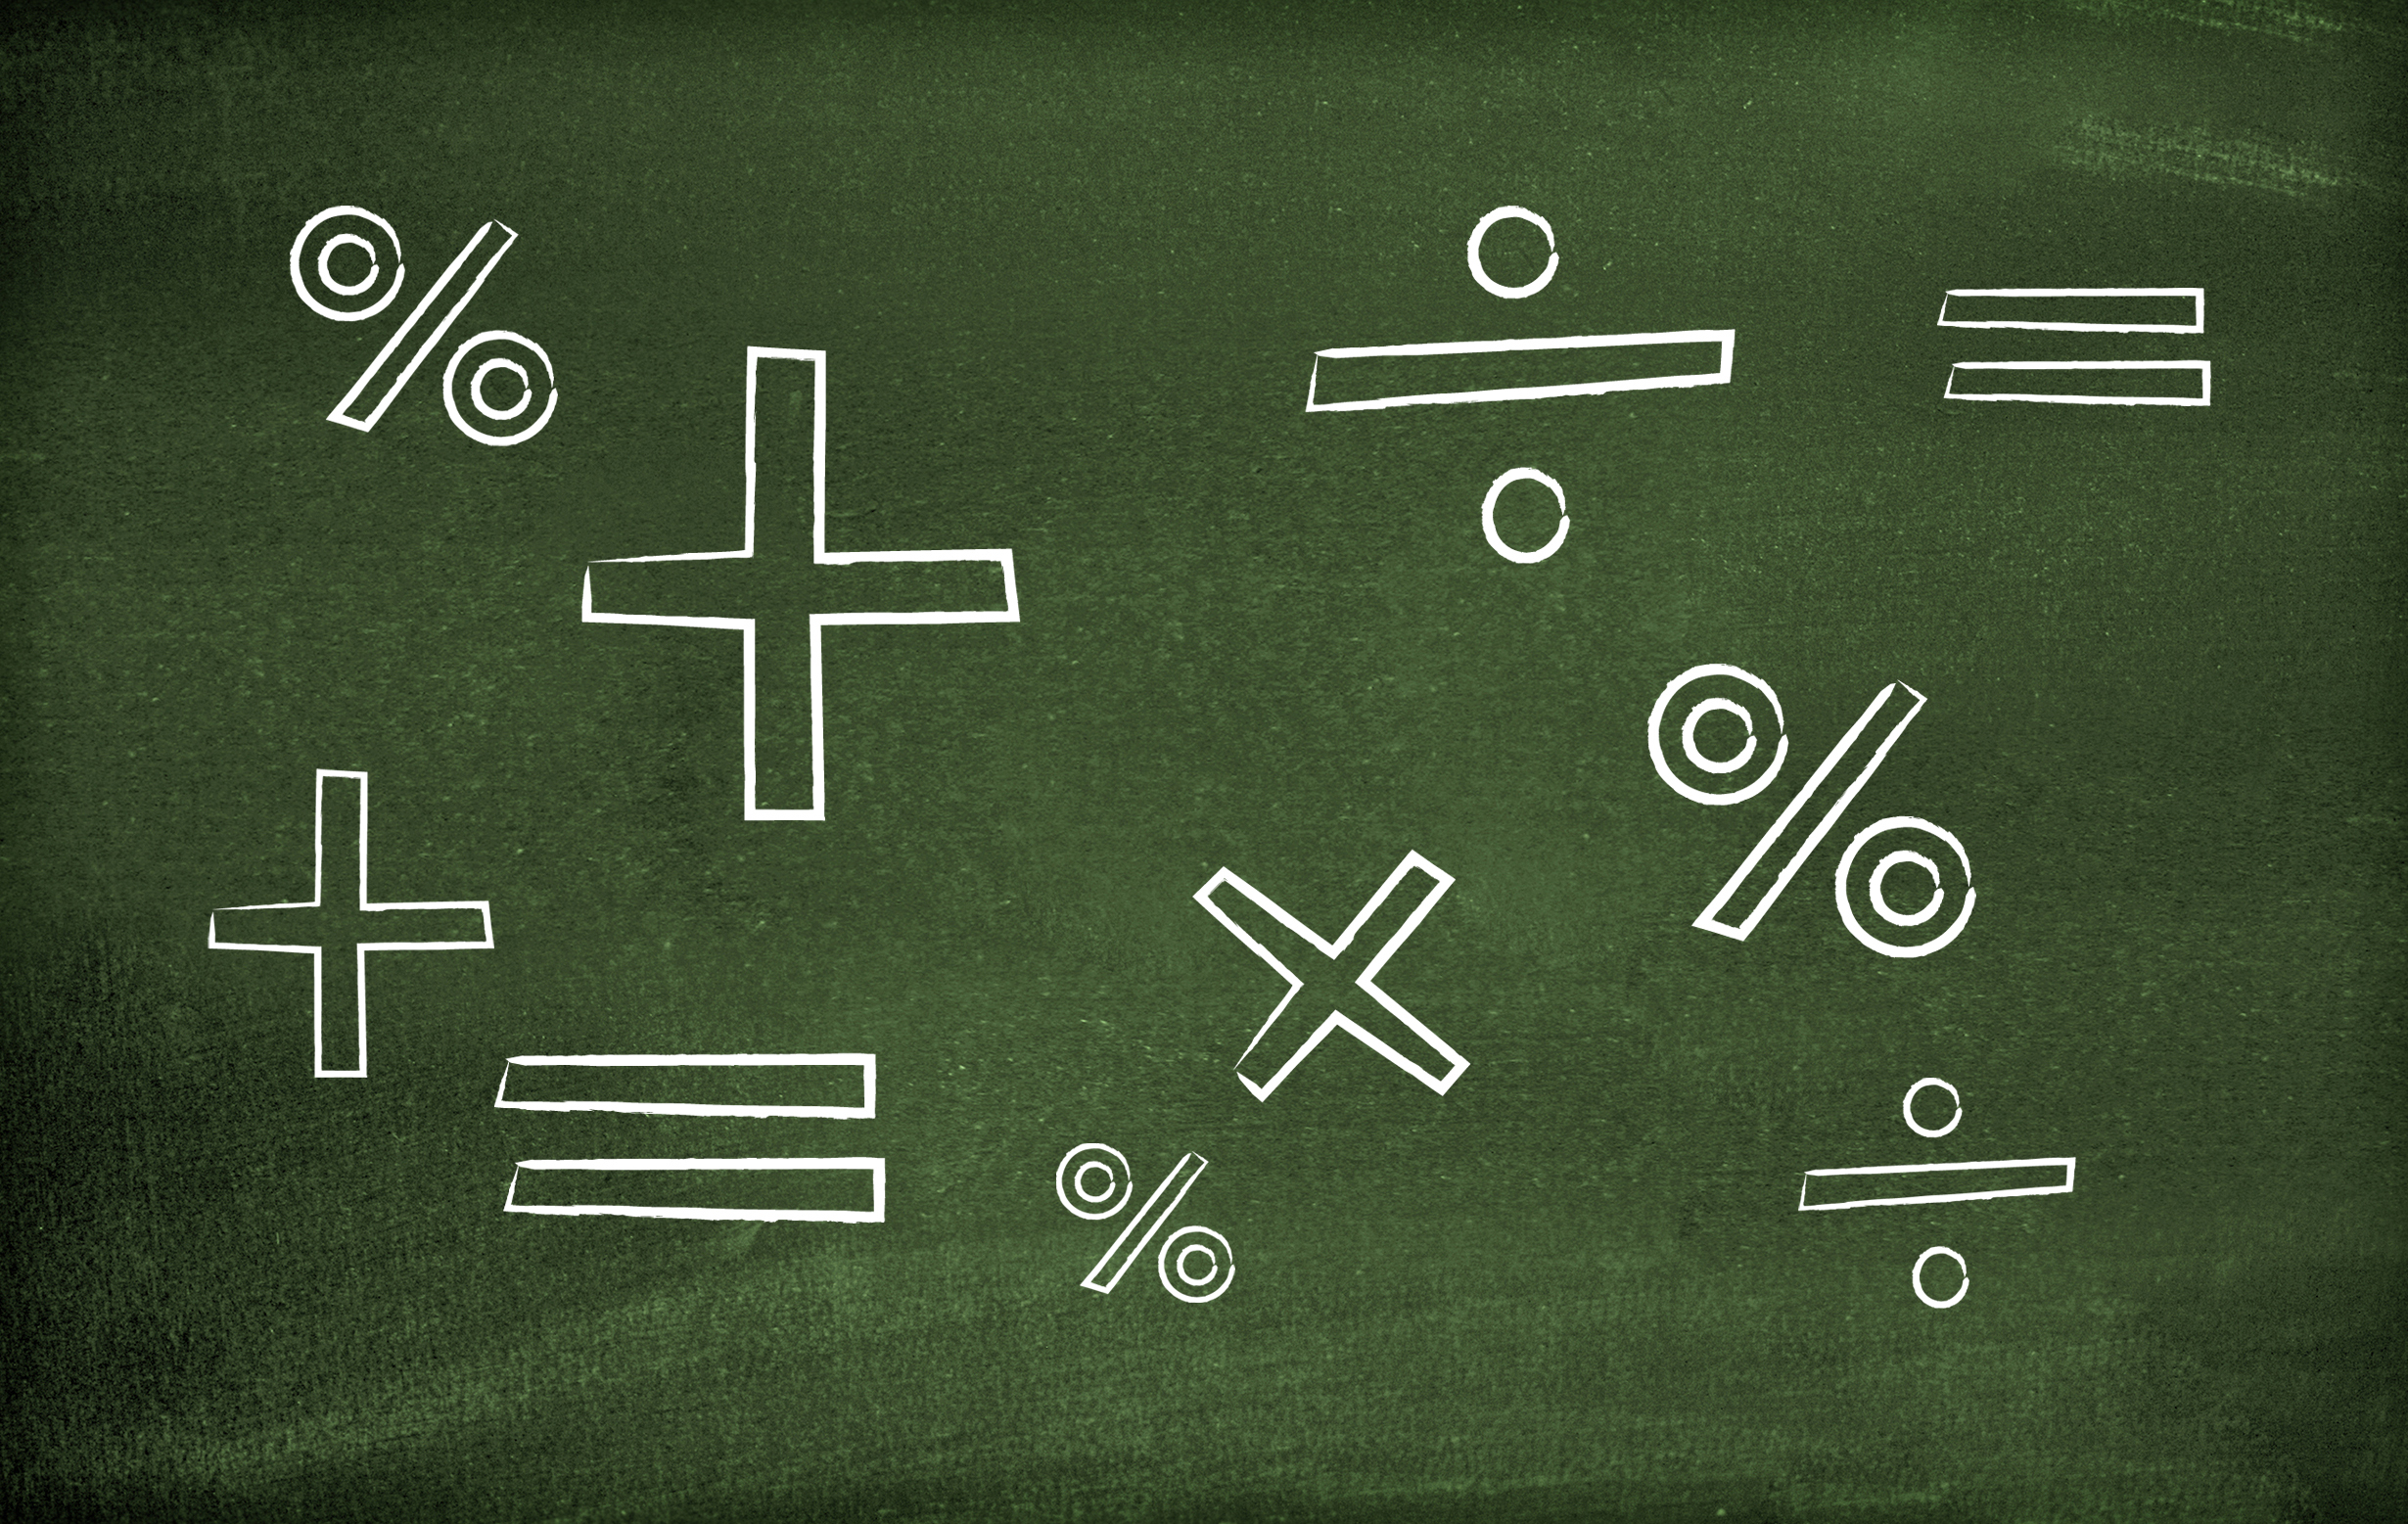 A number of maths symbols drawn on a board